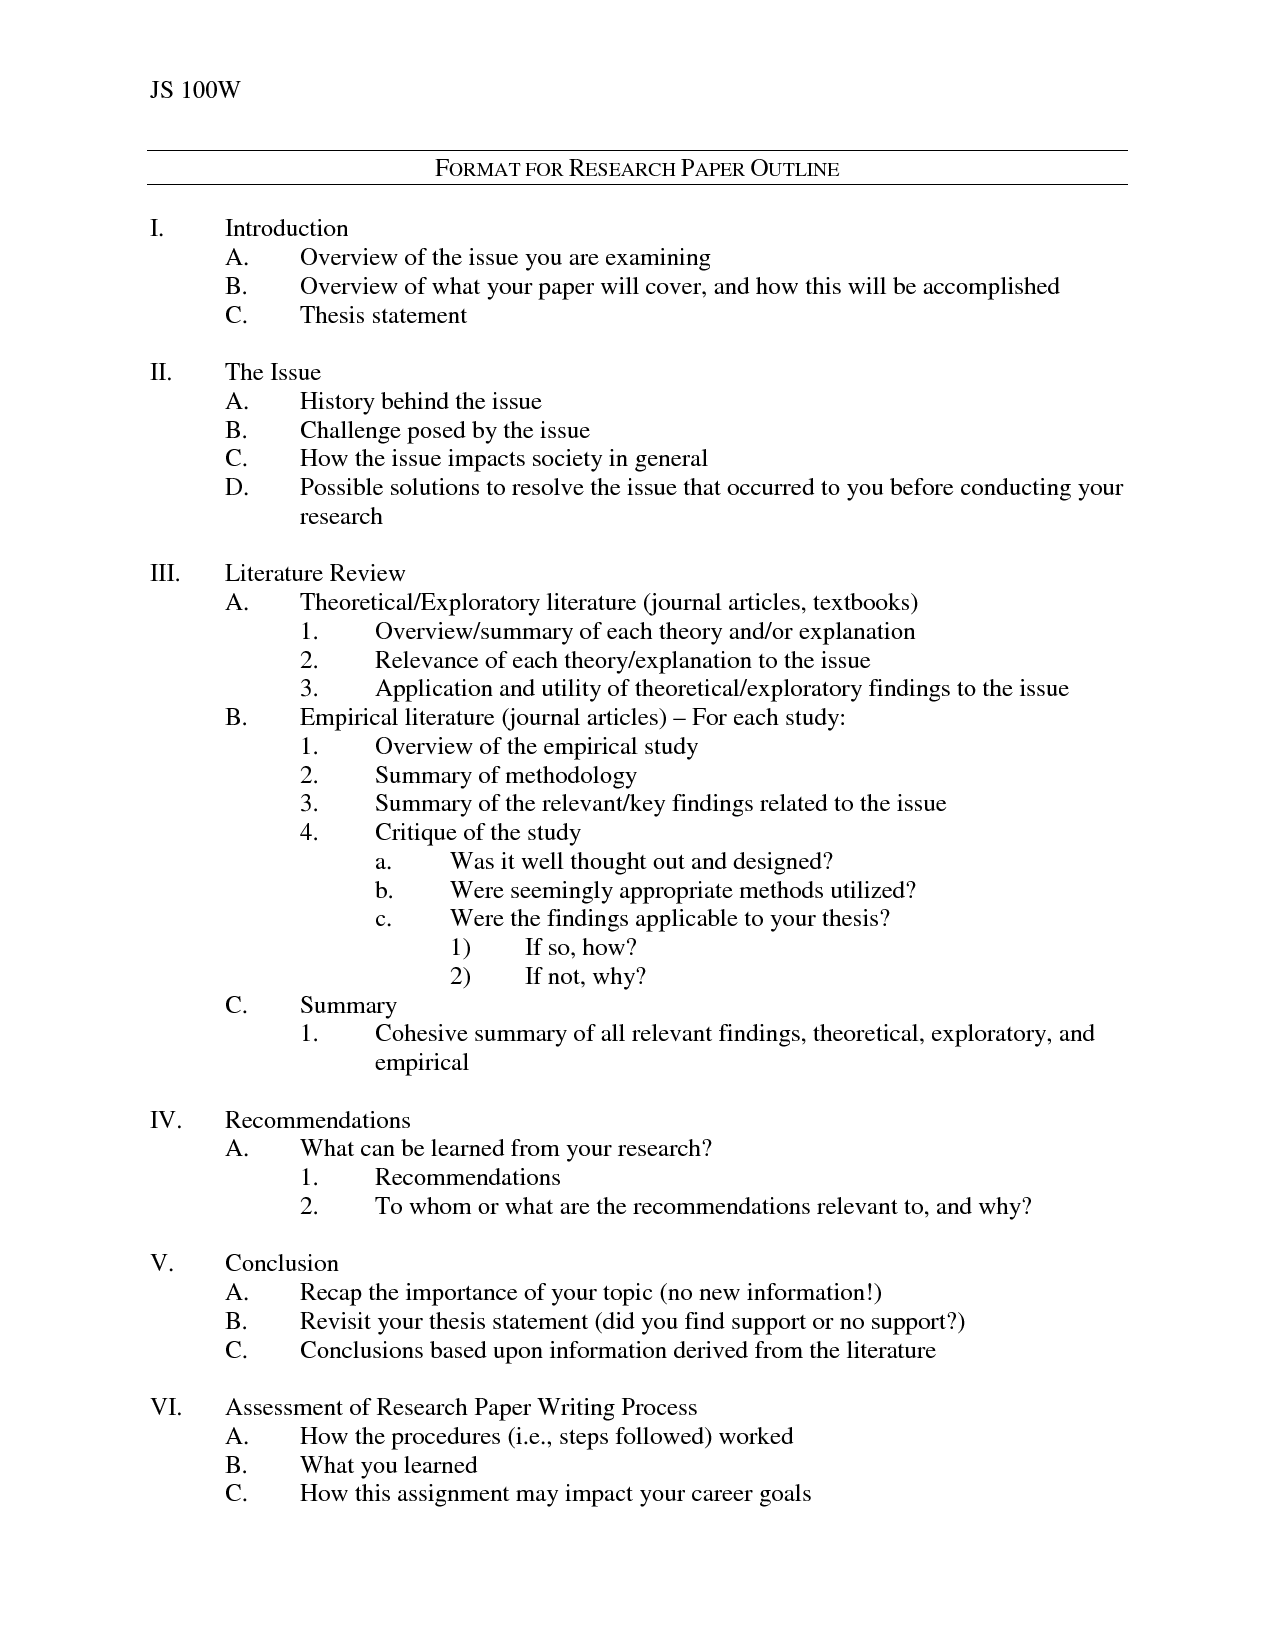 Research Paper Outline Format Example Image